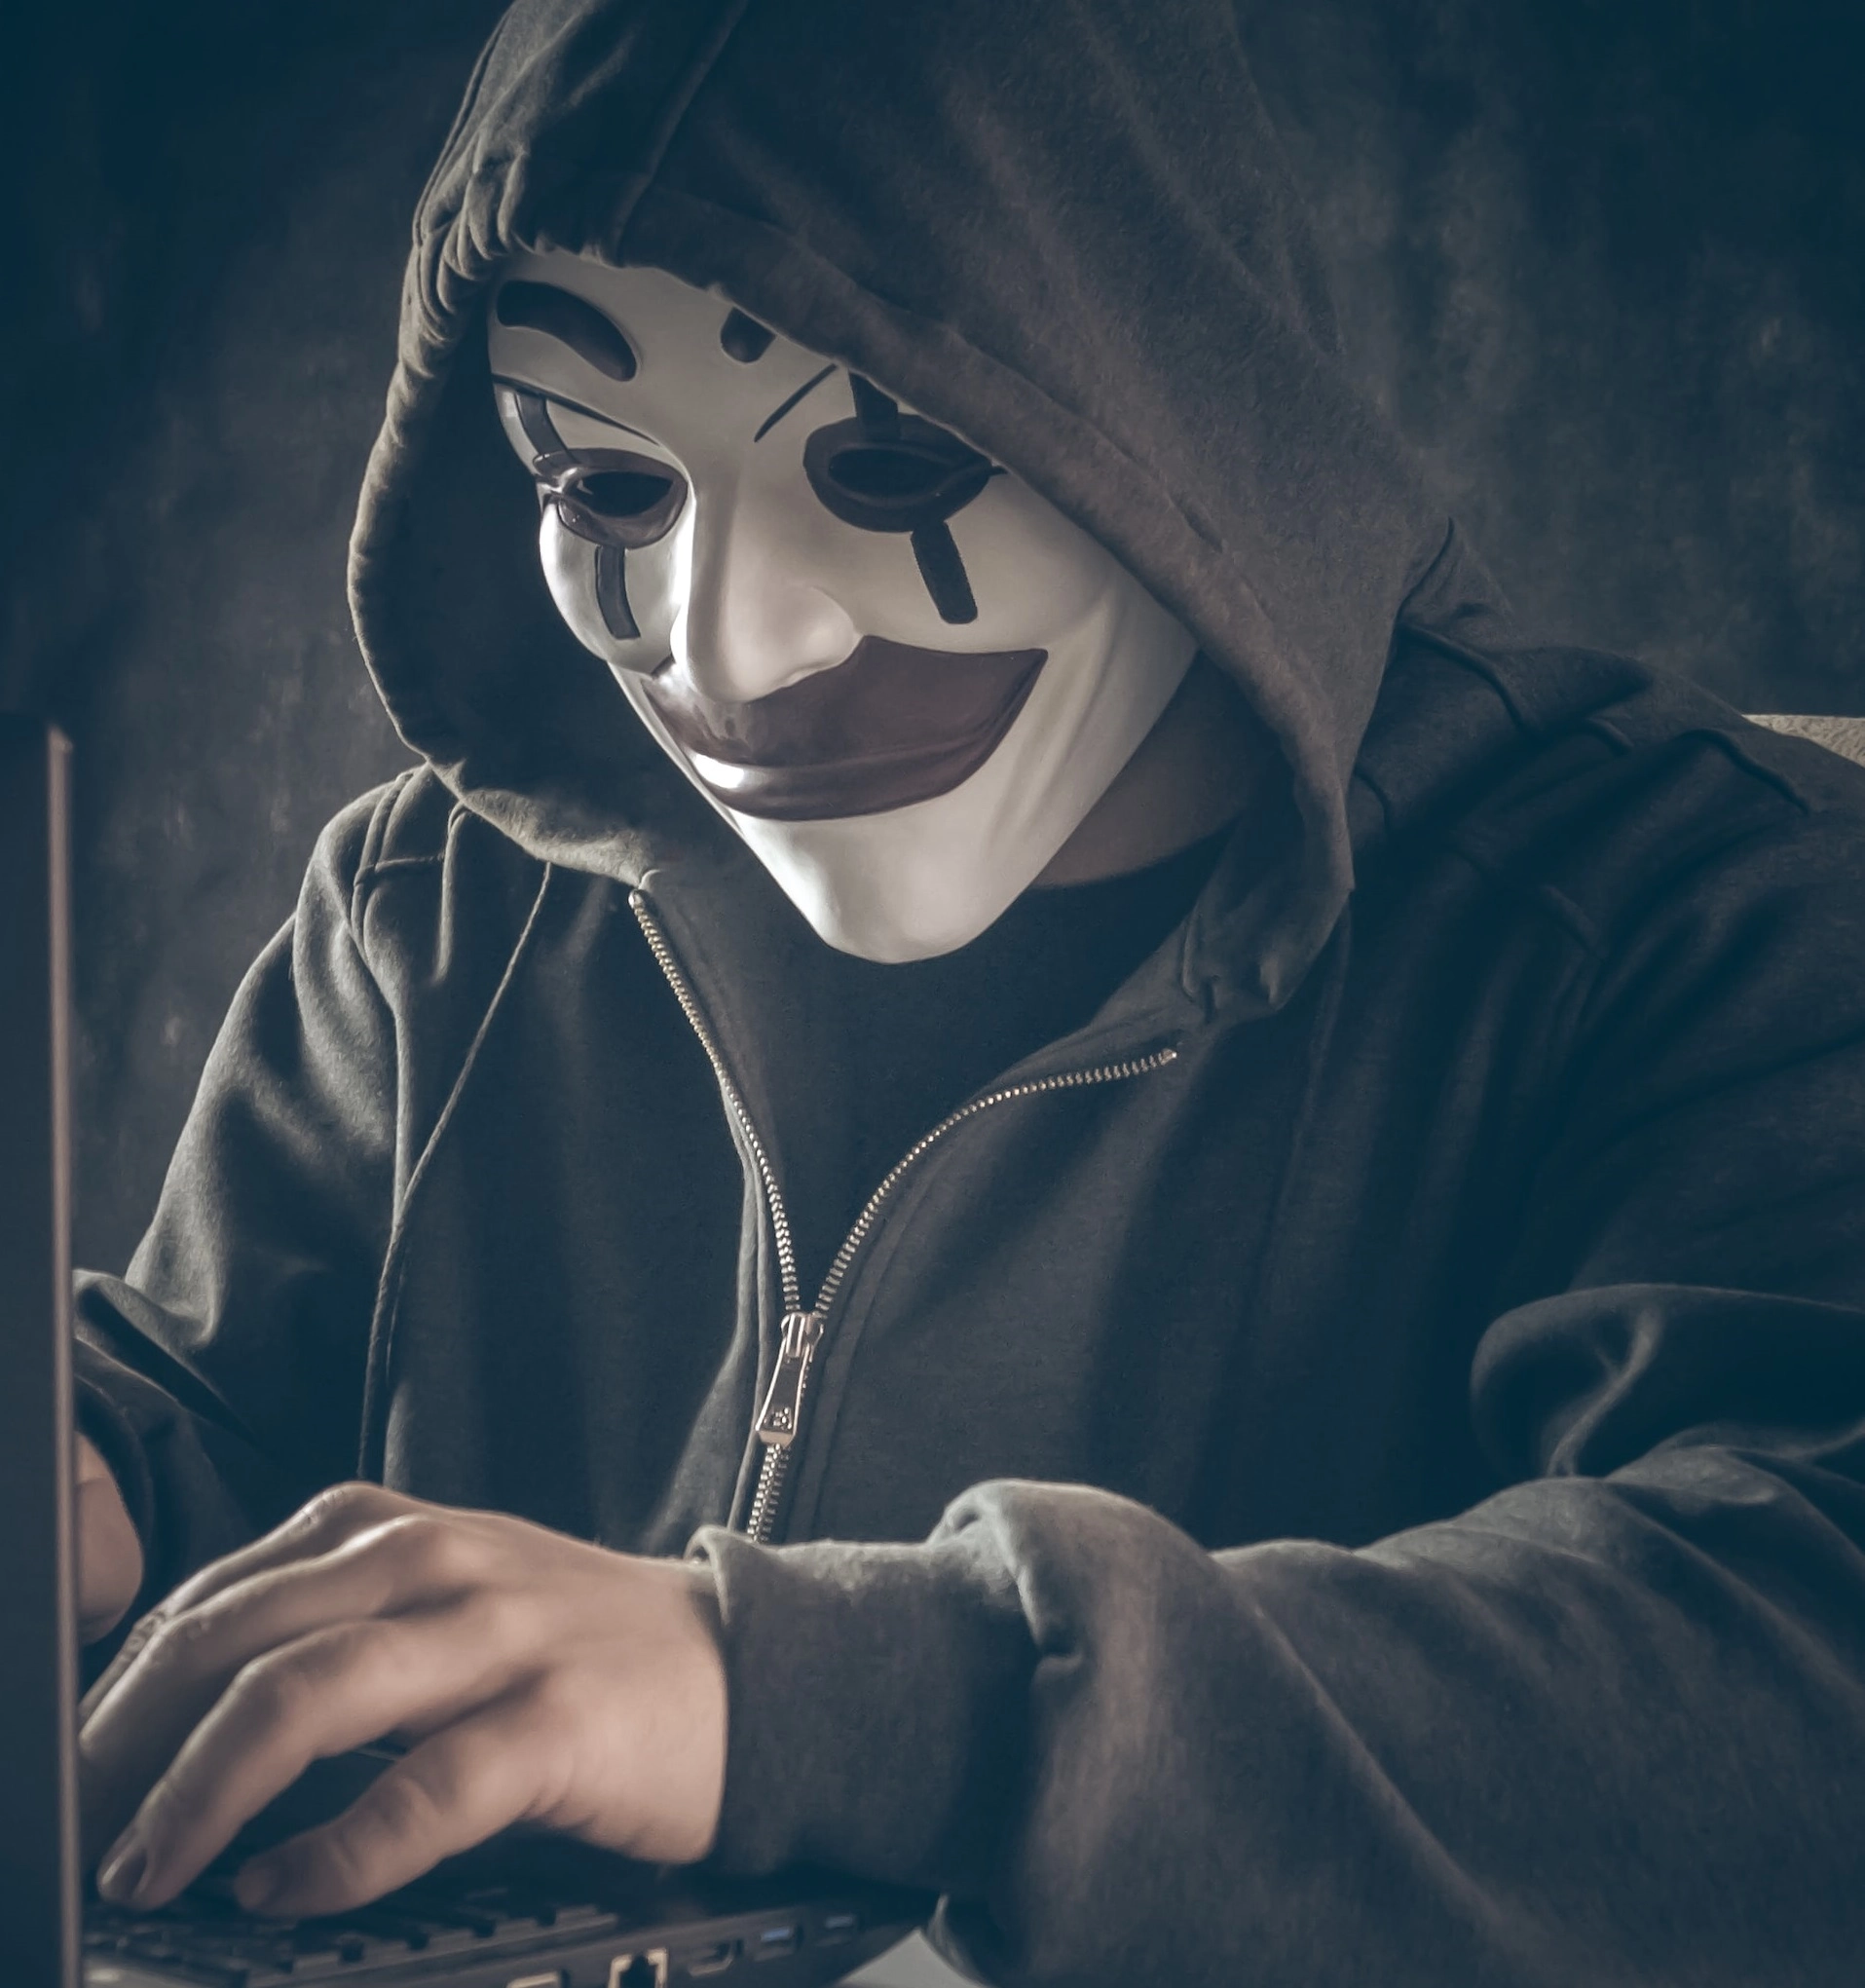 Online fraud - who is it?